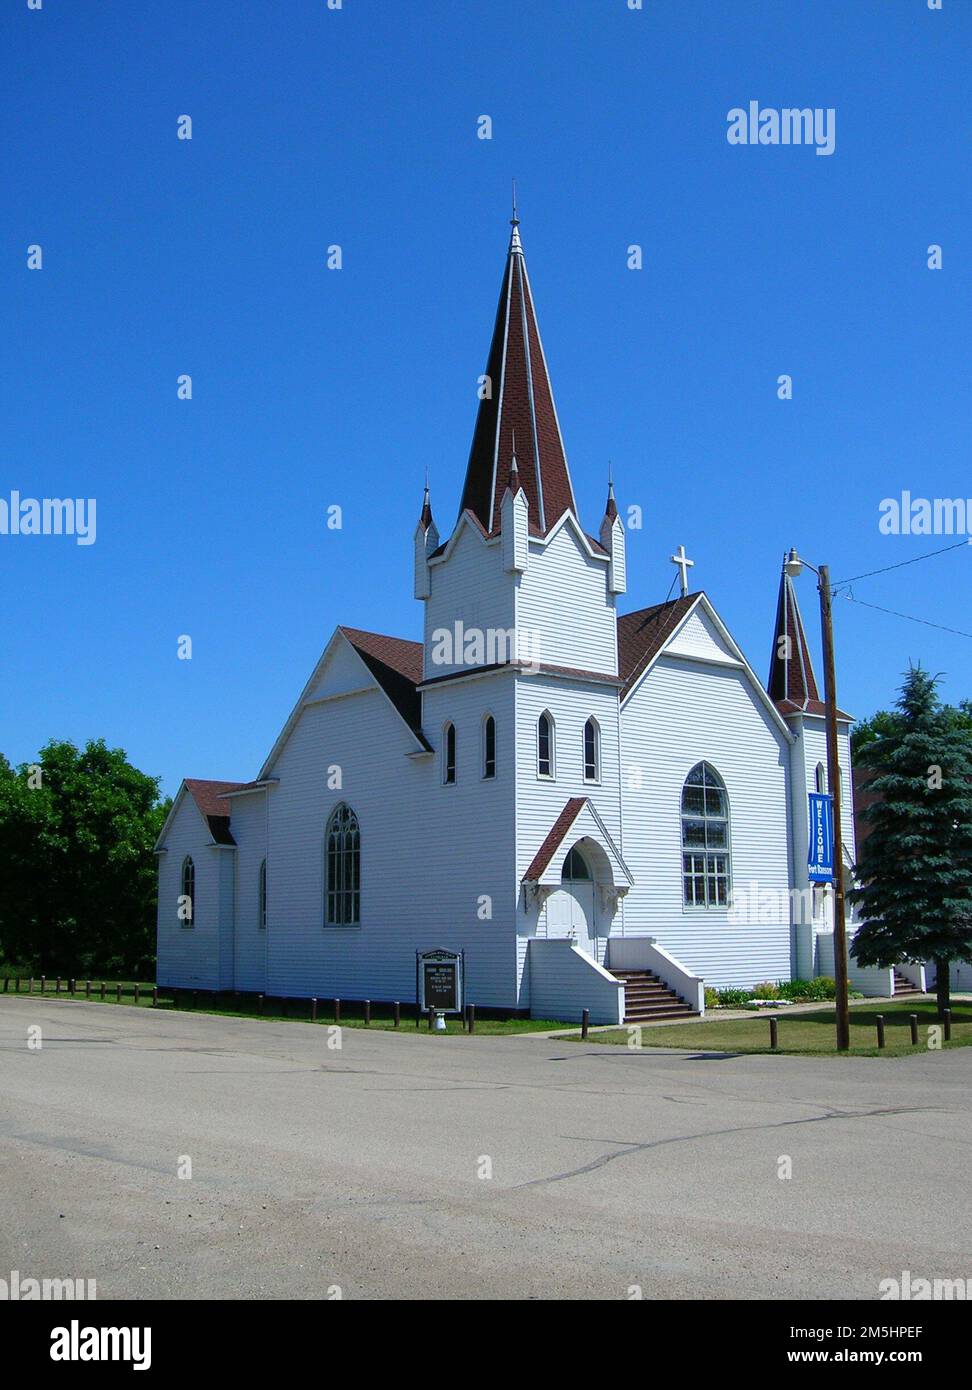 Sheyenne River Valley Scenic Byway - Standing Rock Norwegian Evangelical Church. This white church with its distinctive gray steeple was built in the 1890s after the death of a local resident revealed the need for a local church and congregation to conduct funeral services. The church is one of the few in the area with an old, working, pipe organ. Location: Fort Ransom, North Dakota (46.520° N 97.927° W) Stock Photo